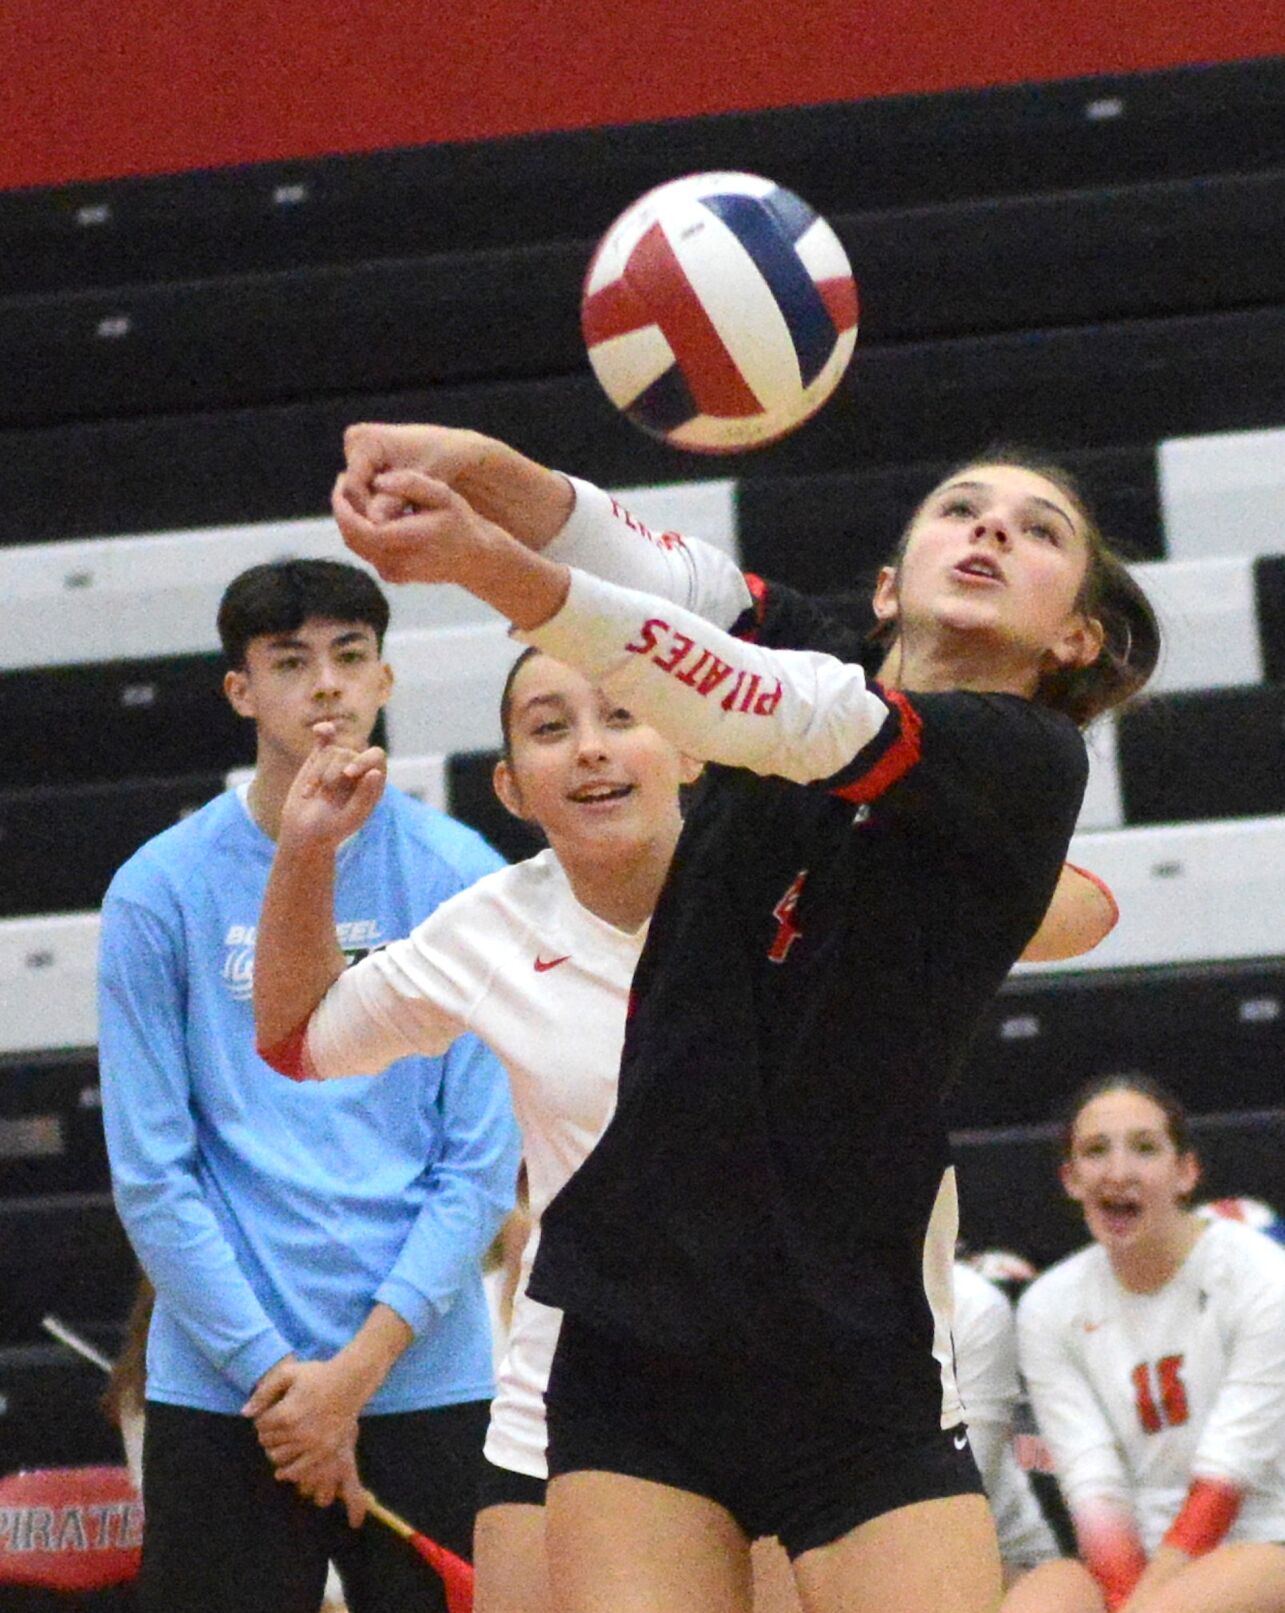 Pewaukee High School’s Girls Volleyball Team Aims to End 47-Year Championship Drought